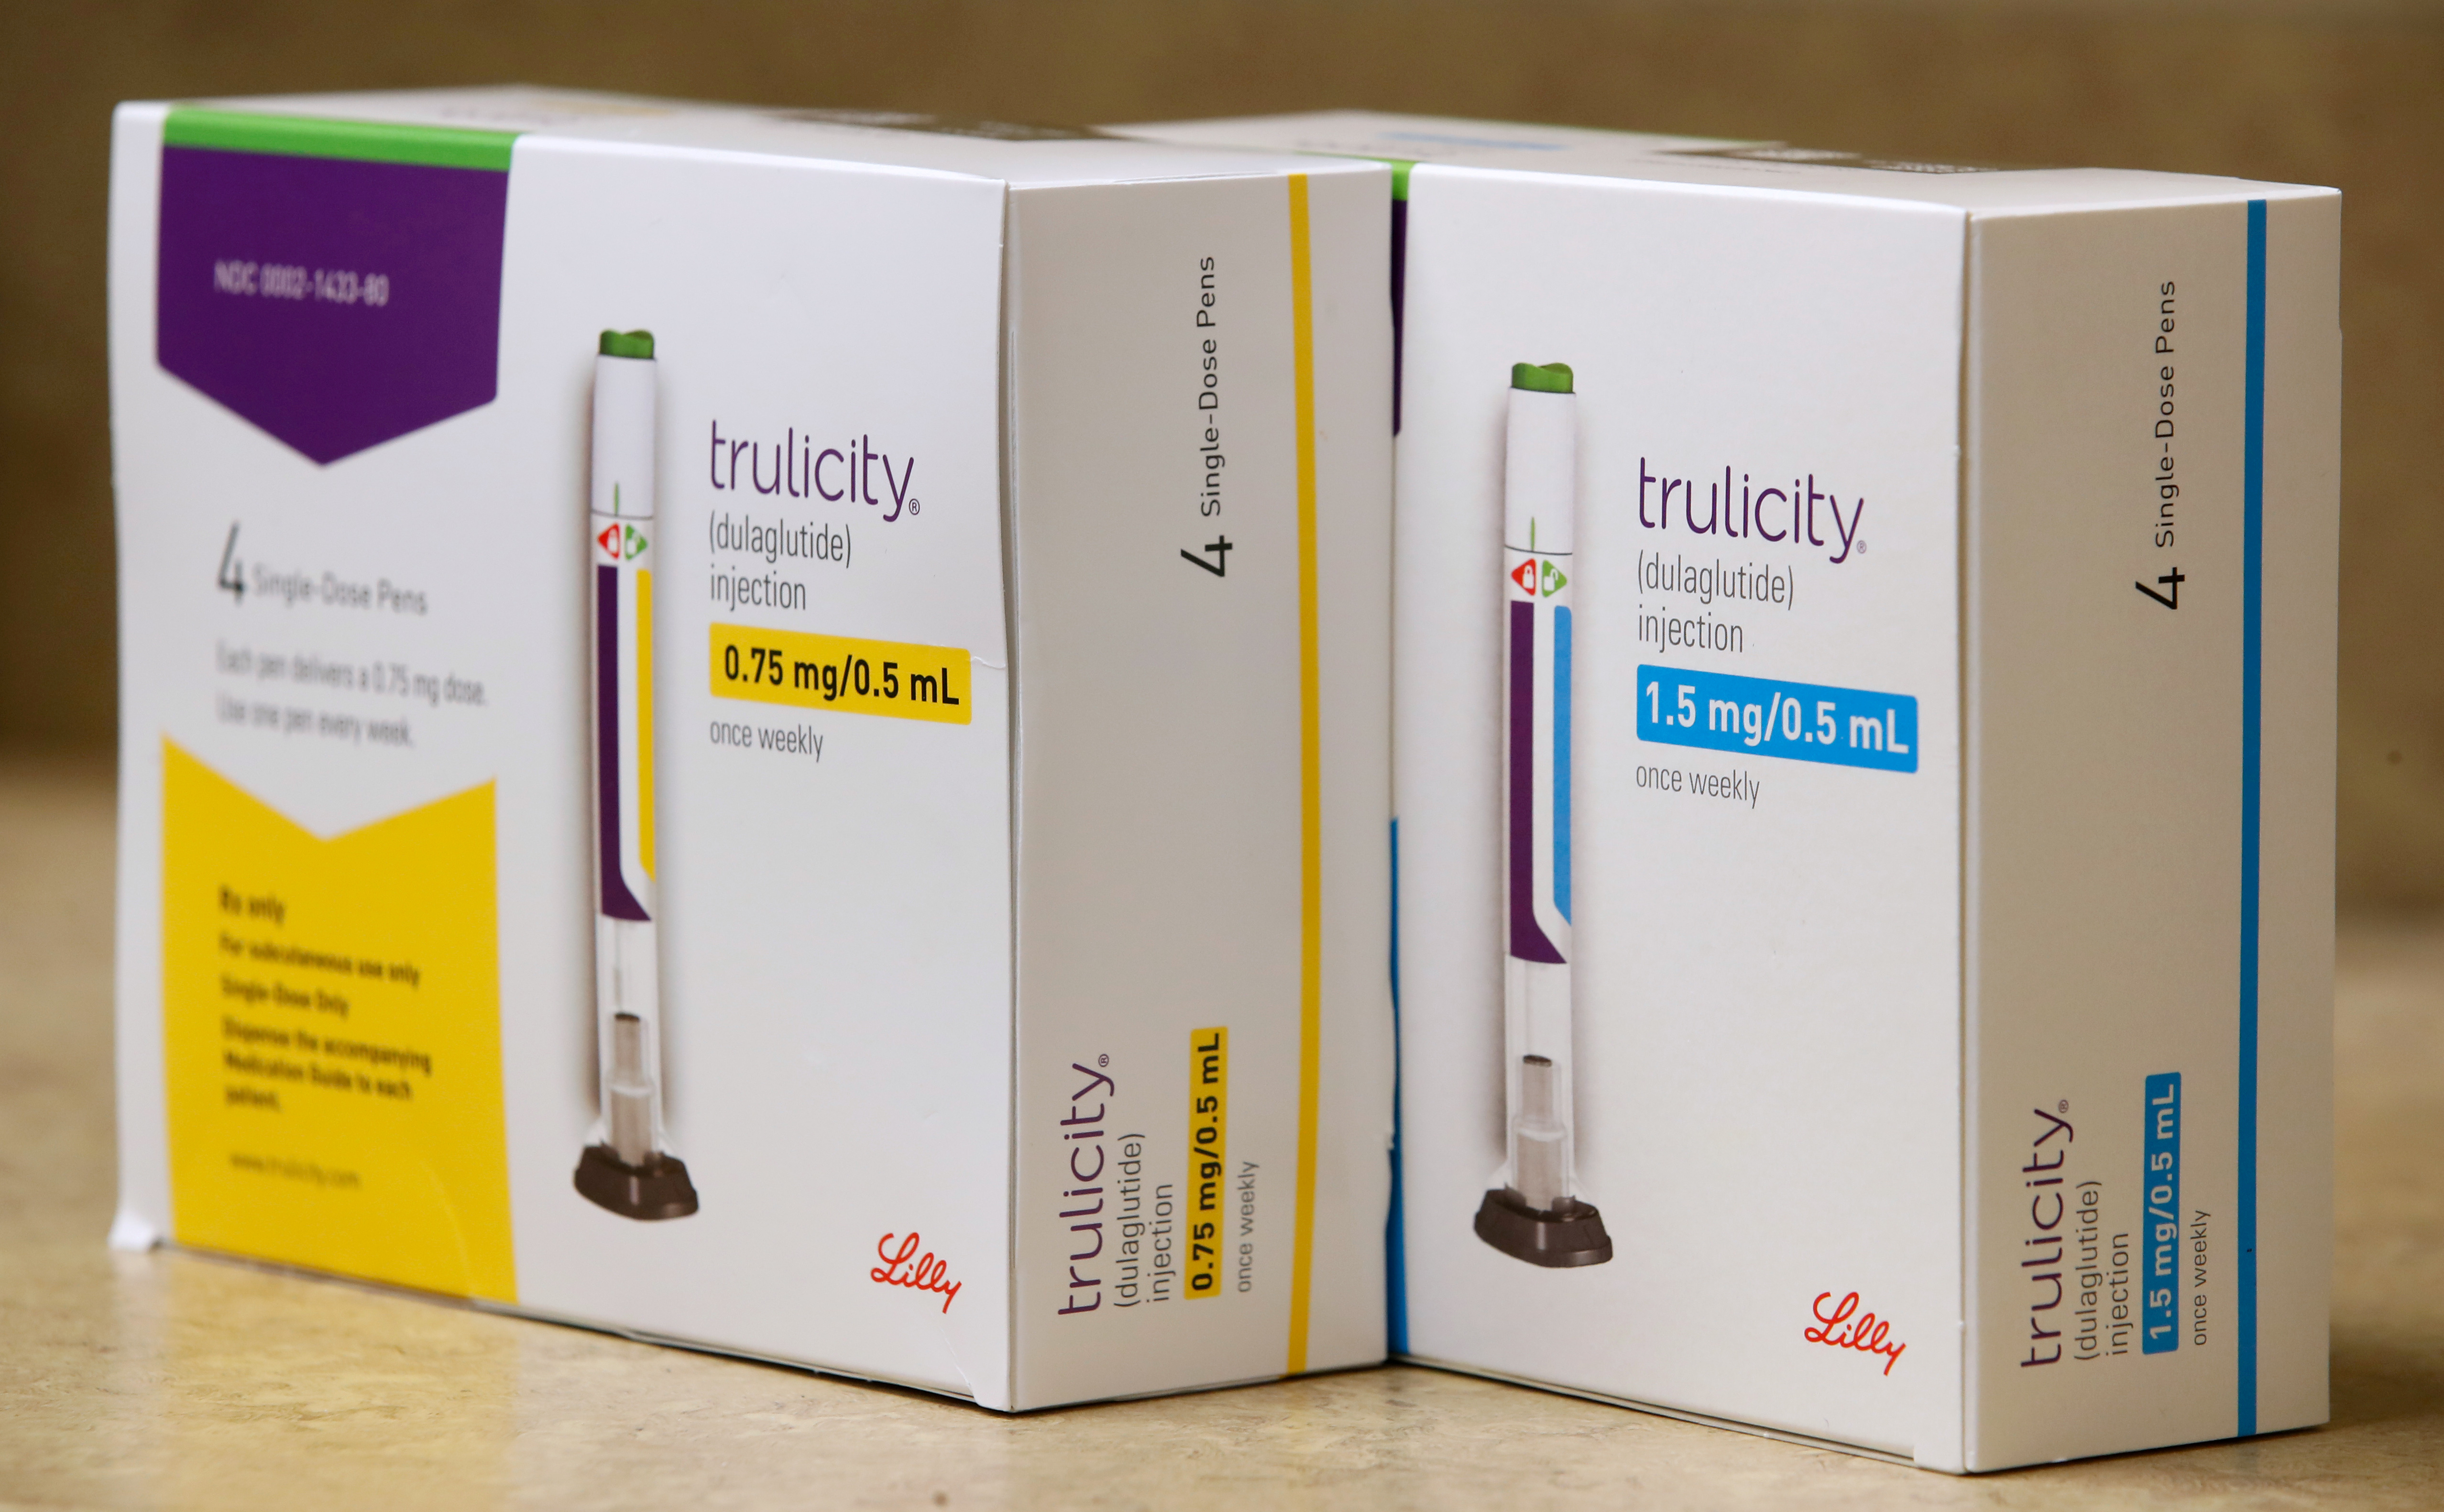 Boxes of the drug trulicity, made by Eli Lilly and Company, sit on a counter at a pharmacy in Provo